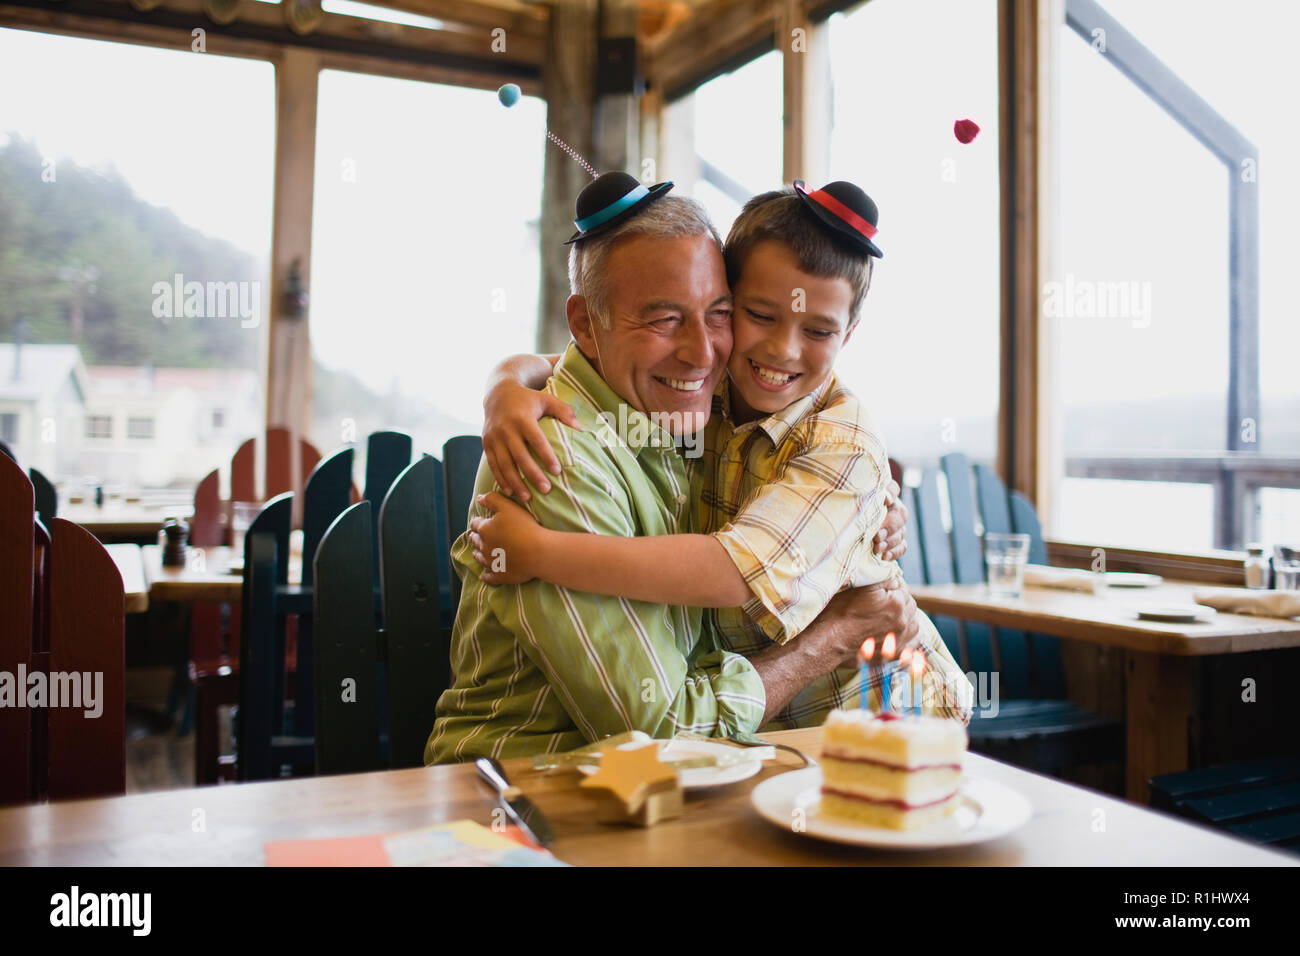 Smiling young boy and his father hugging next to a birthday cake while wearing funny hats inside a diner. Stock Photo